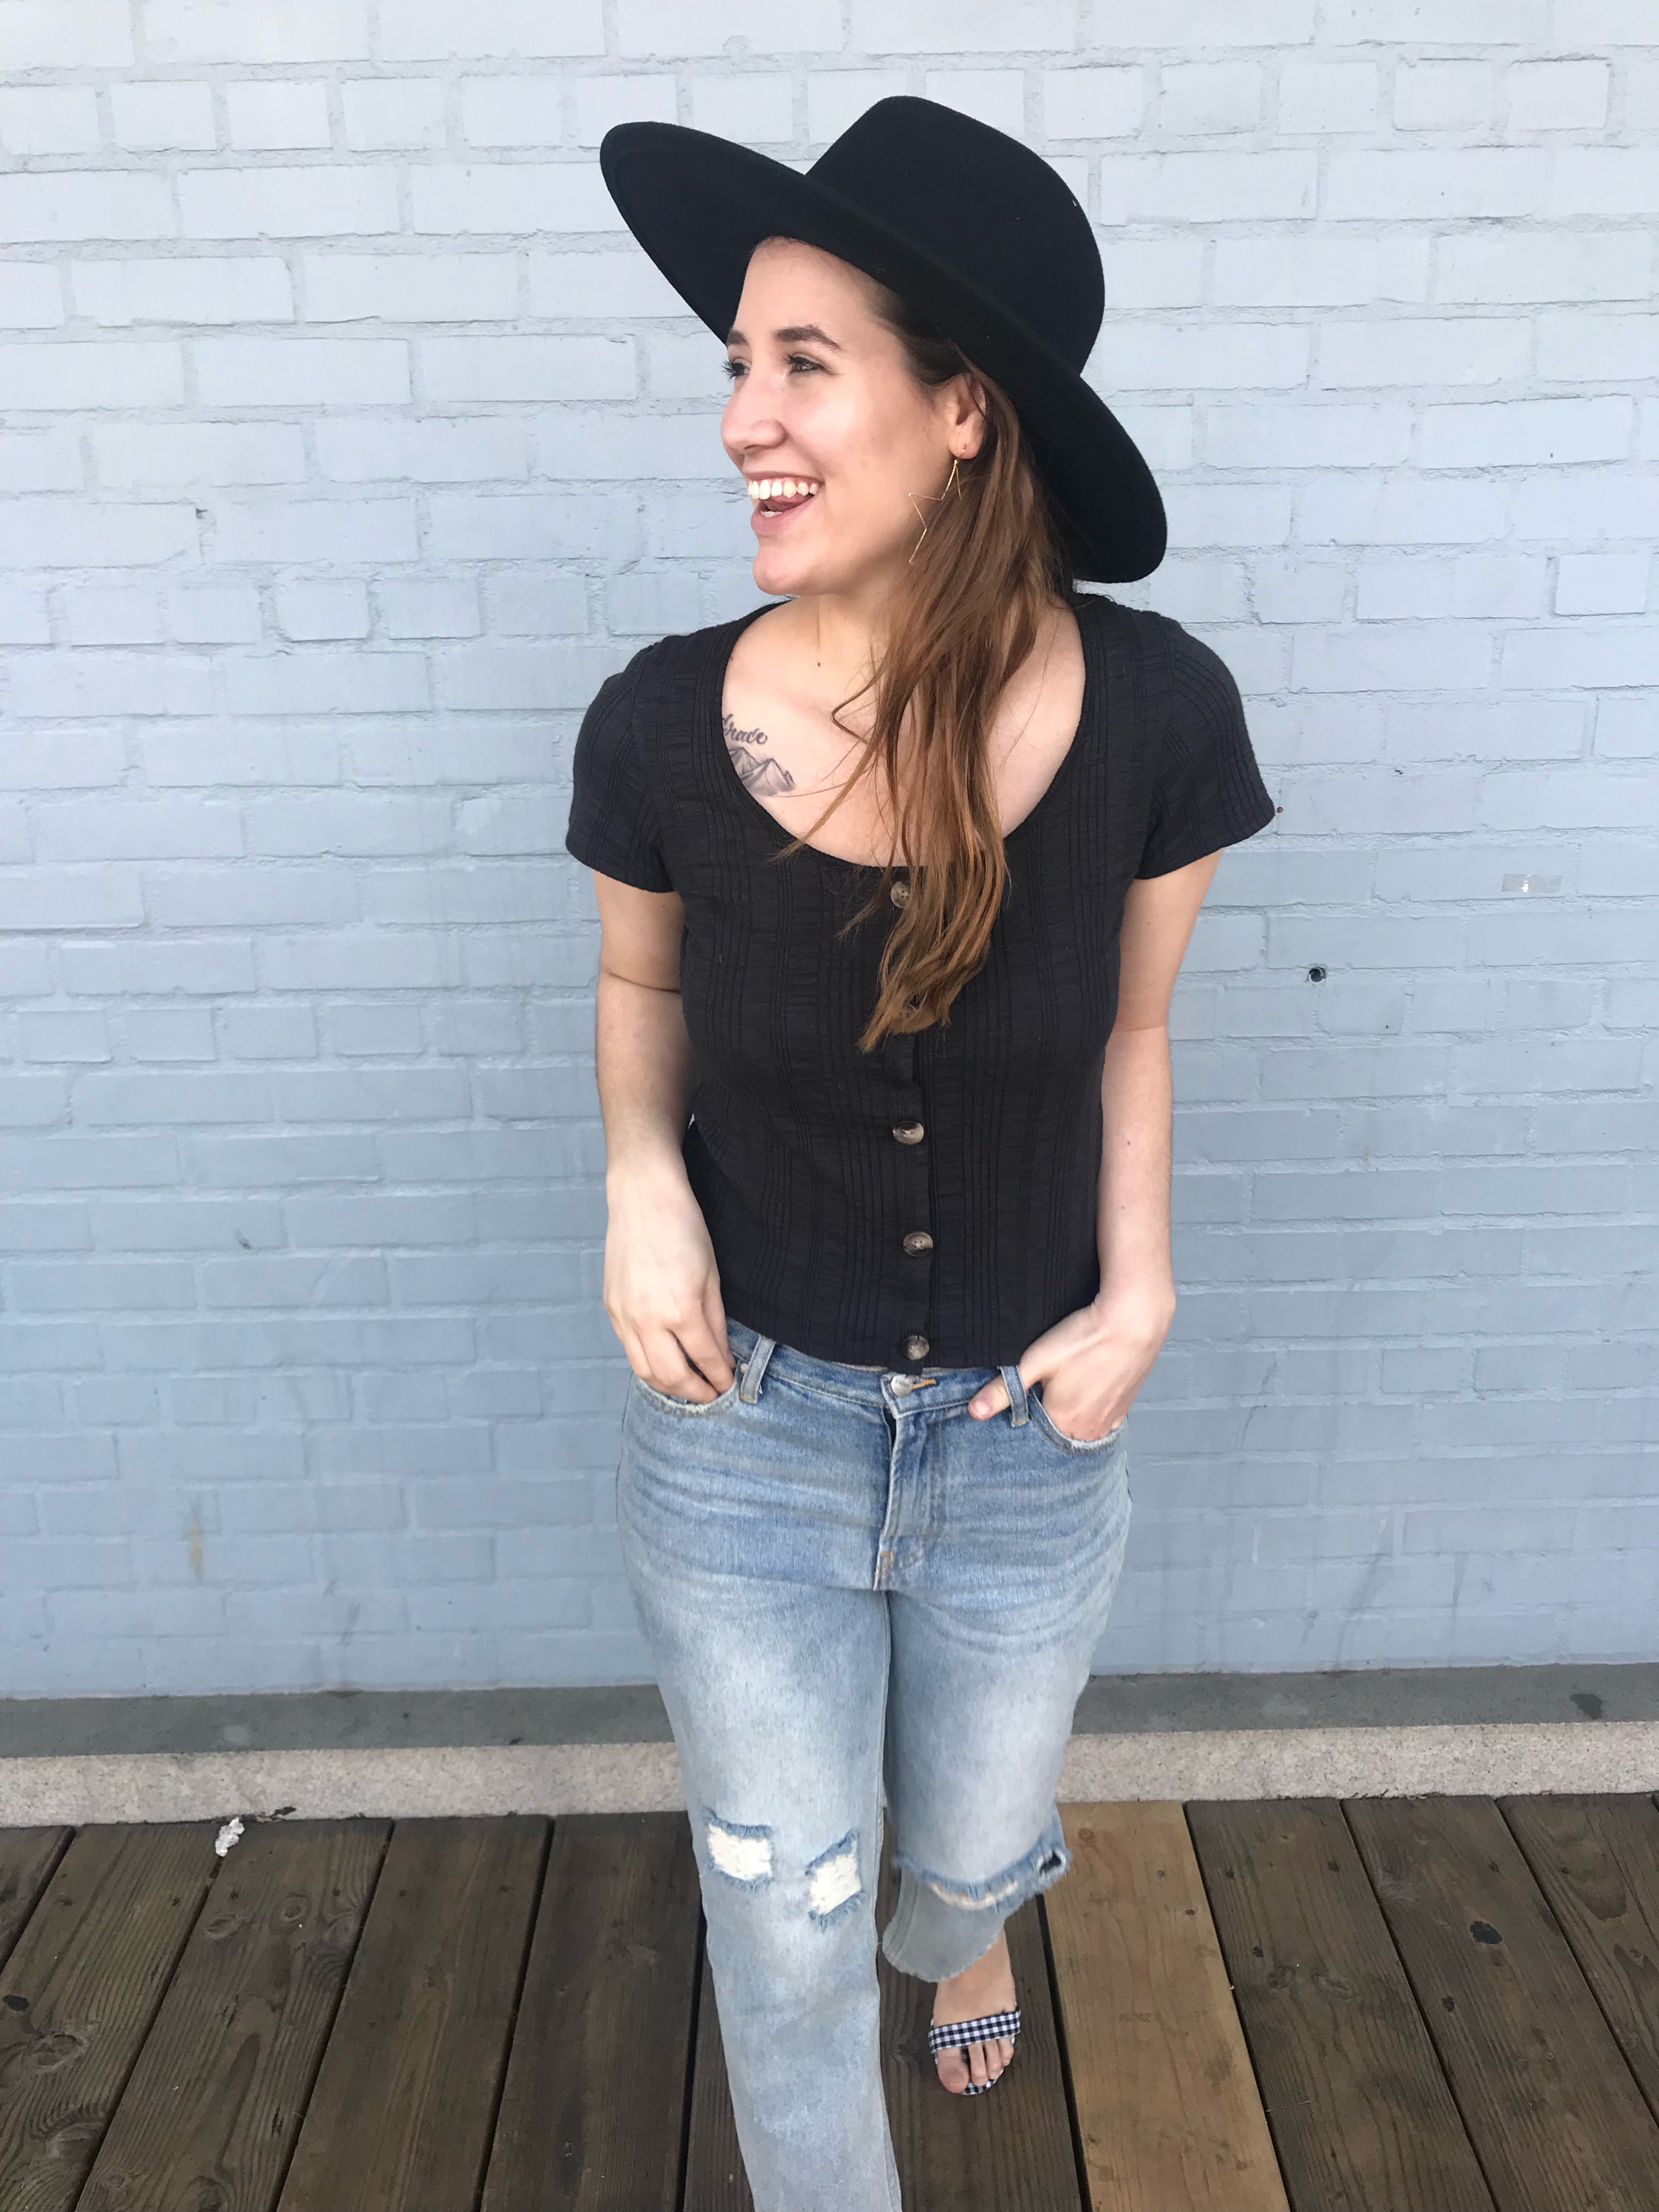 How to wear wide brim hats - The Wine Style